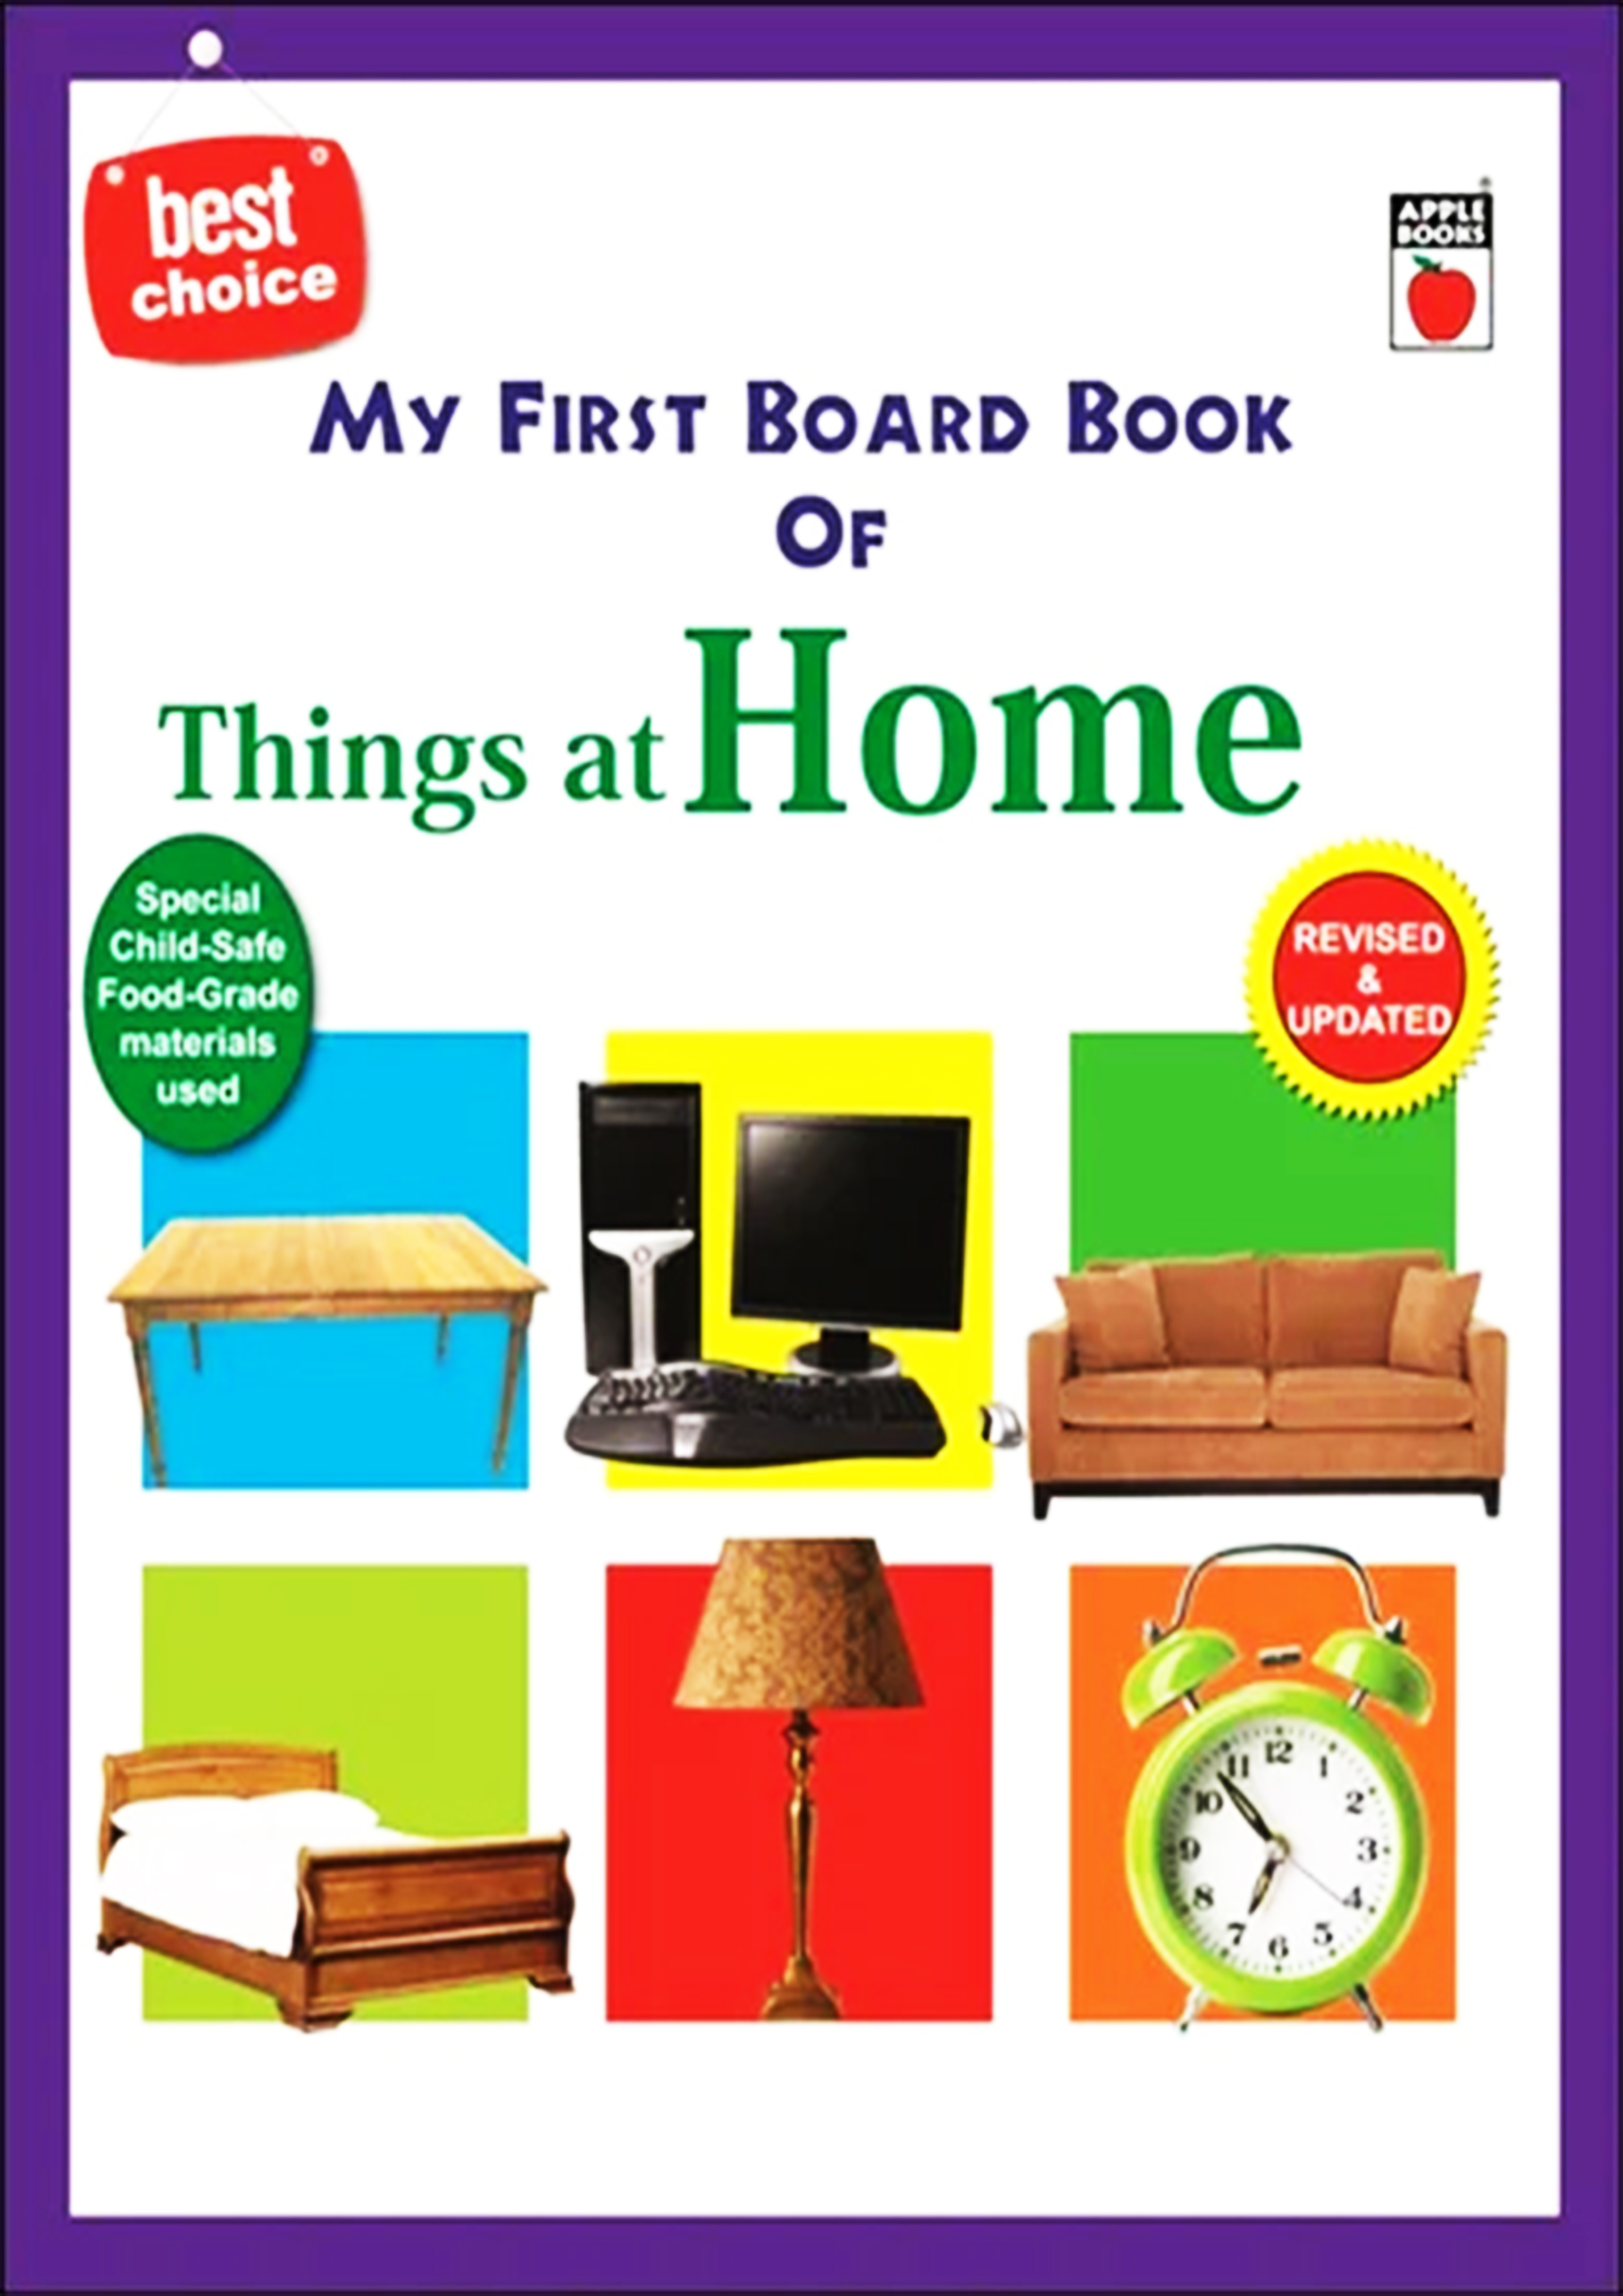 Best Choice: My First Board Book of Things At Home (পেপারব্যাক)